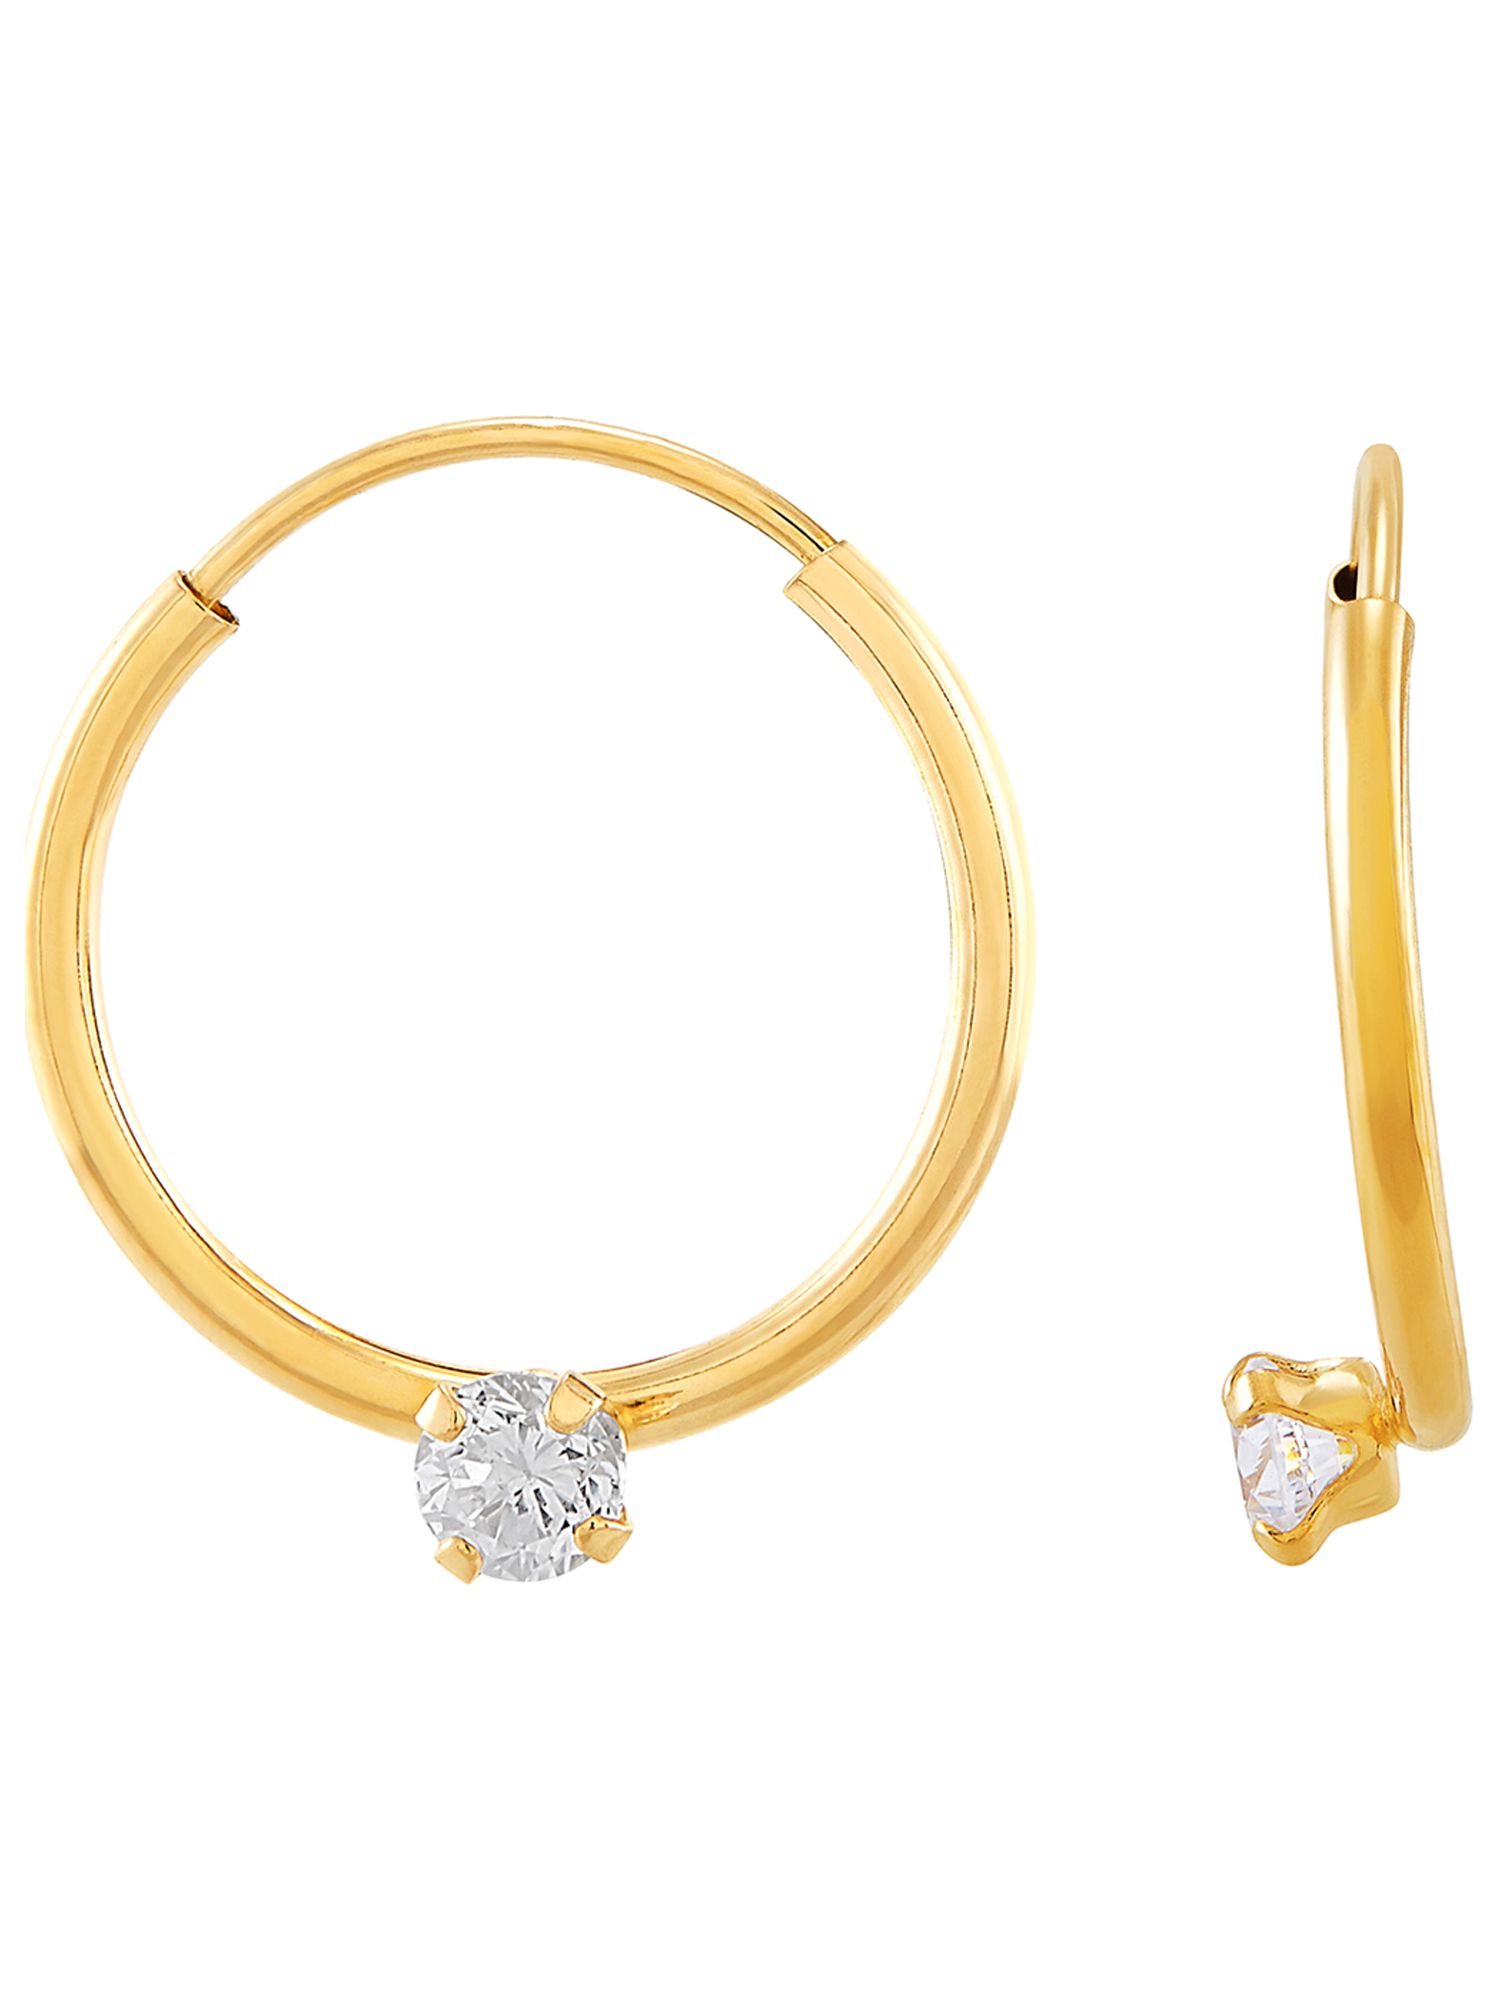 Brilliance Fine Jewelry Hoop with CZ and CZ Studs 10K Yellow Gold Set Earrings - image 5 of 8